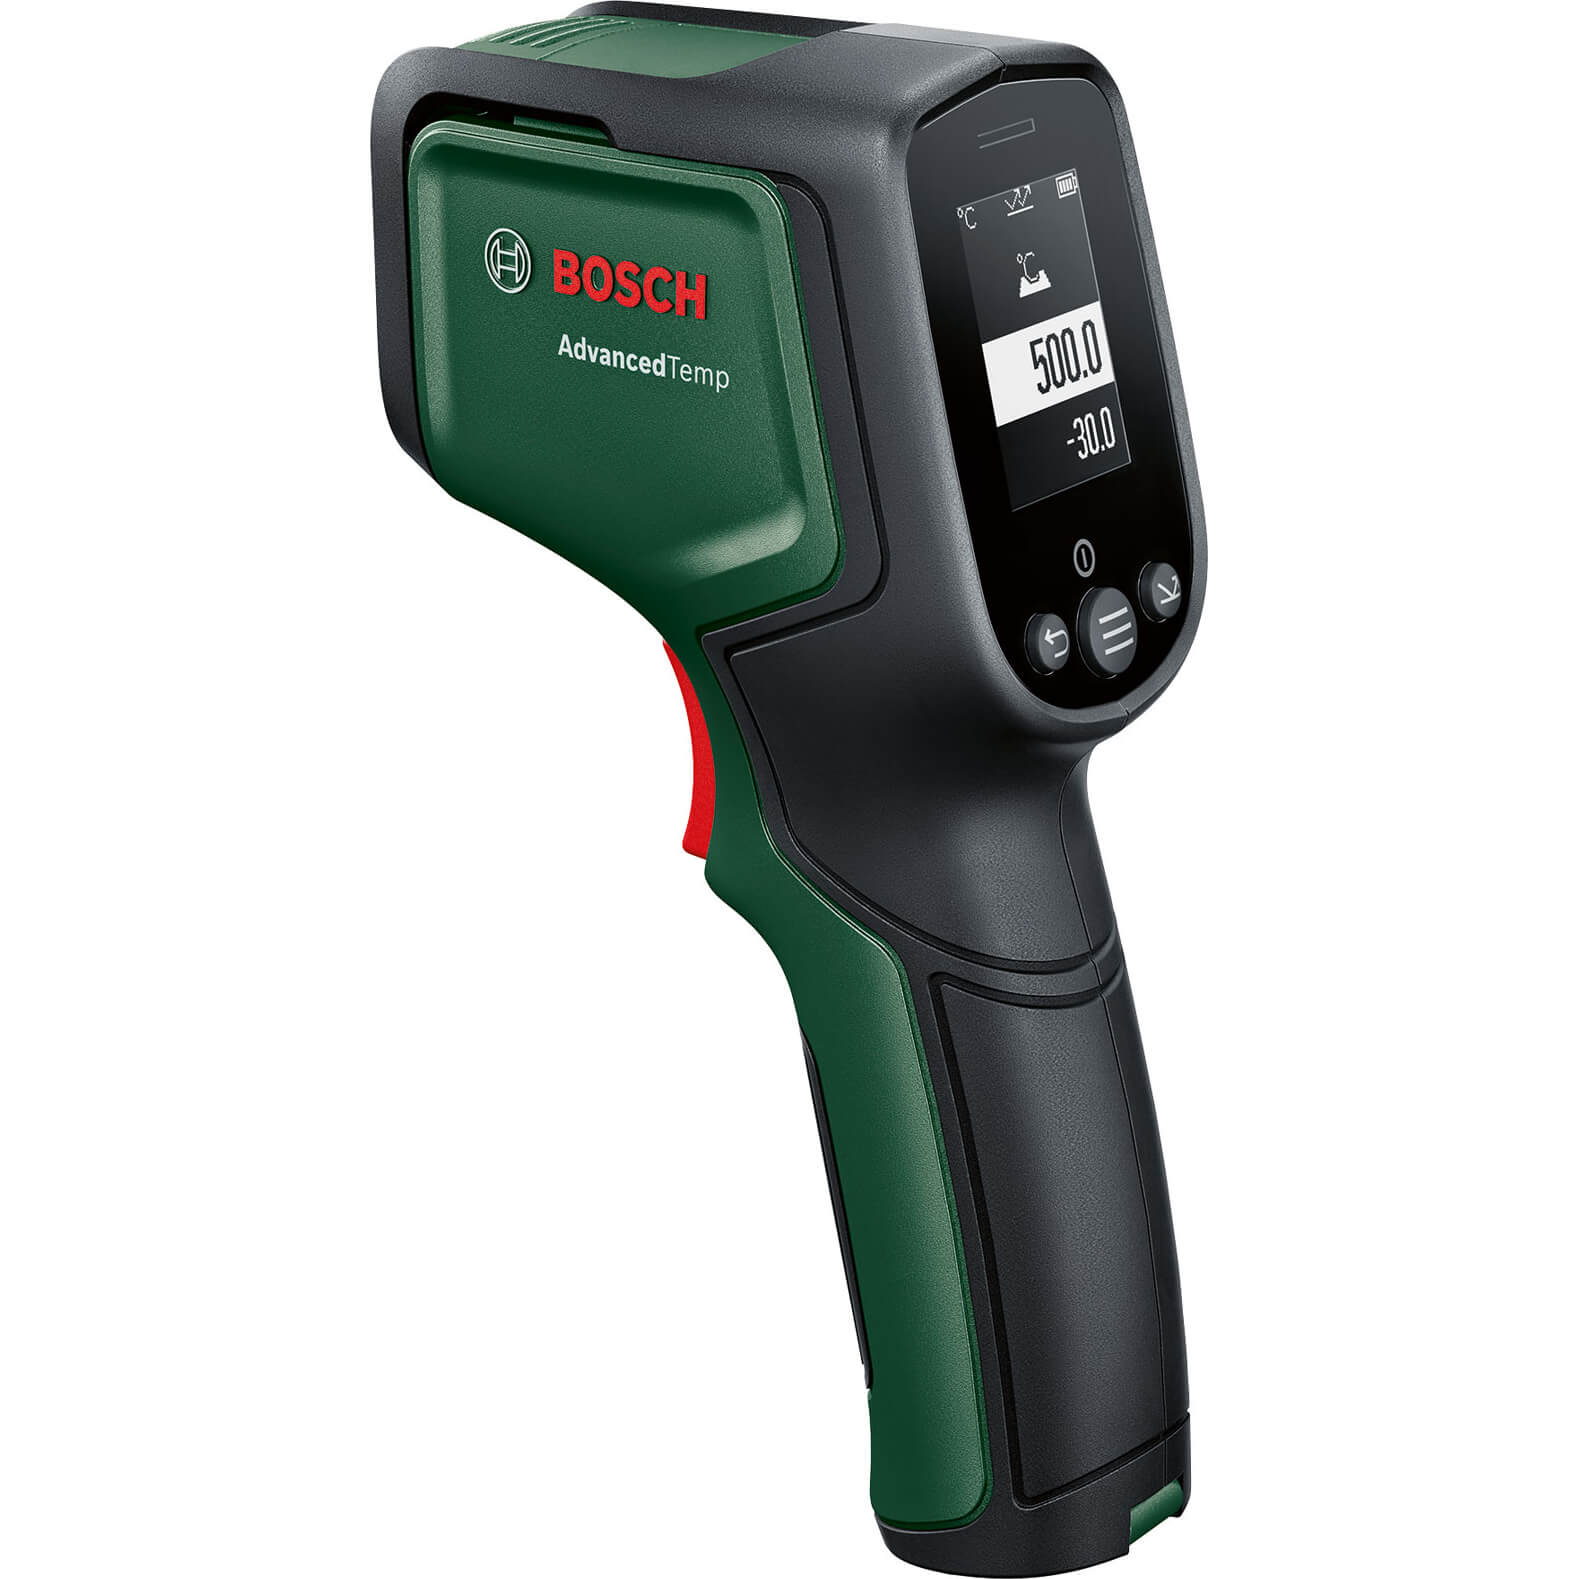 Bosch ADVANCEDTEMP Infrared Thermal Detector and Thermometer